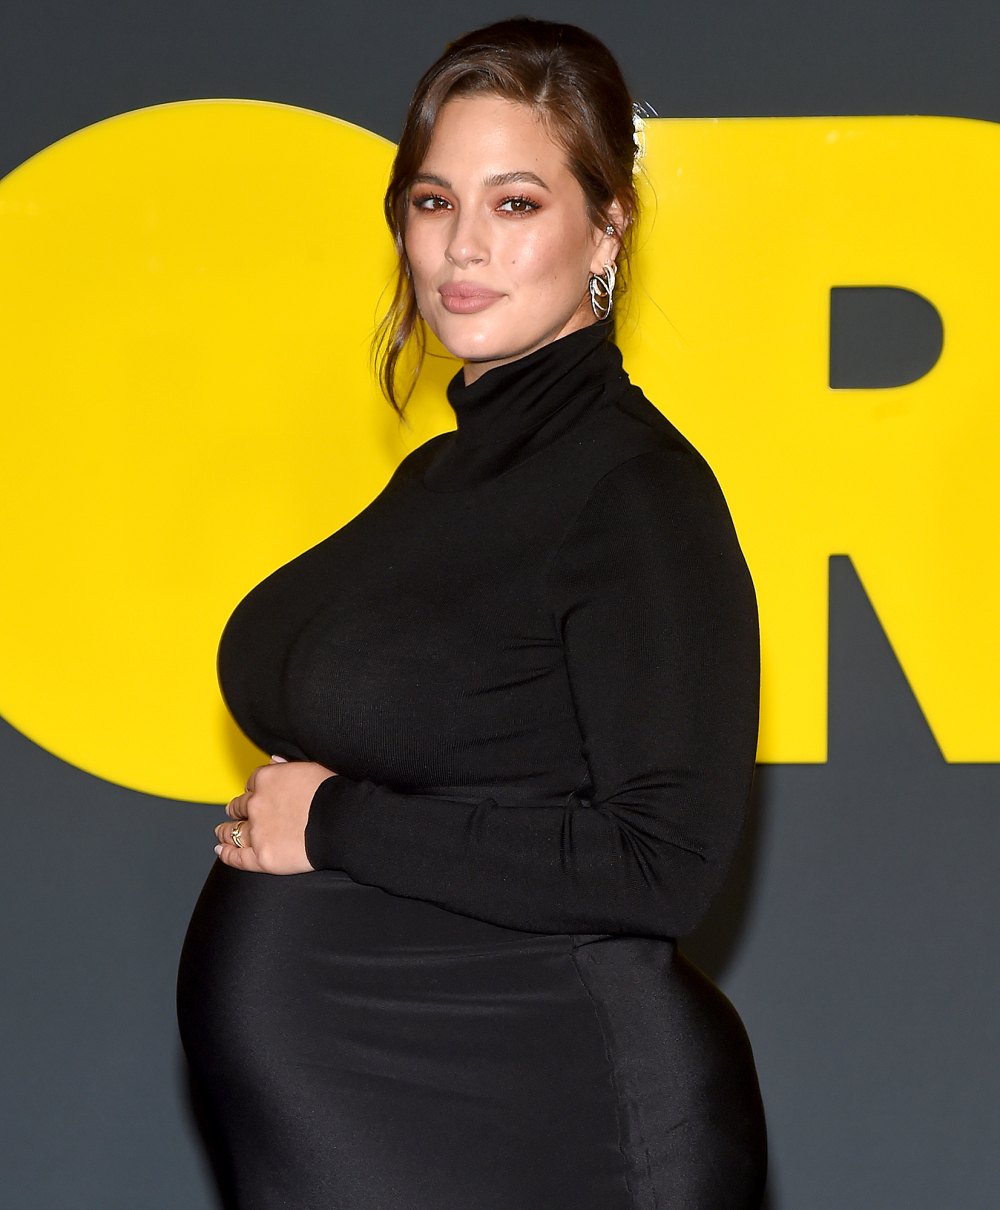 Pregnant-Ashley-Graham-Cries-Discussing-Her-Decision-to-Post-Stretch-Mark-Picture